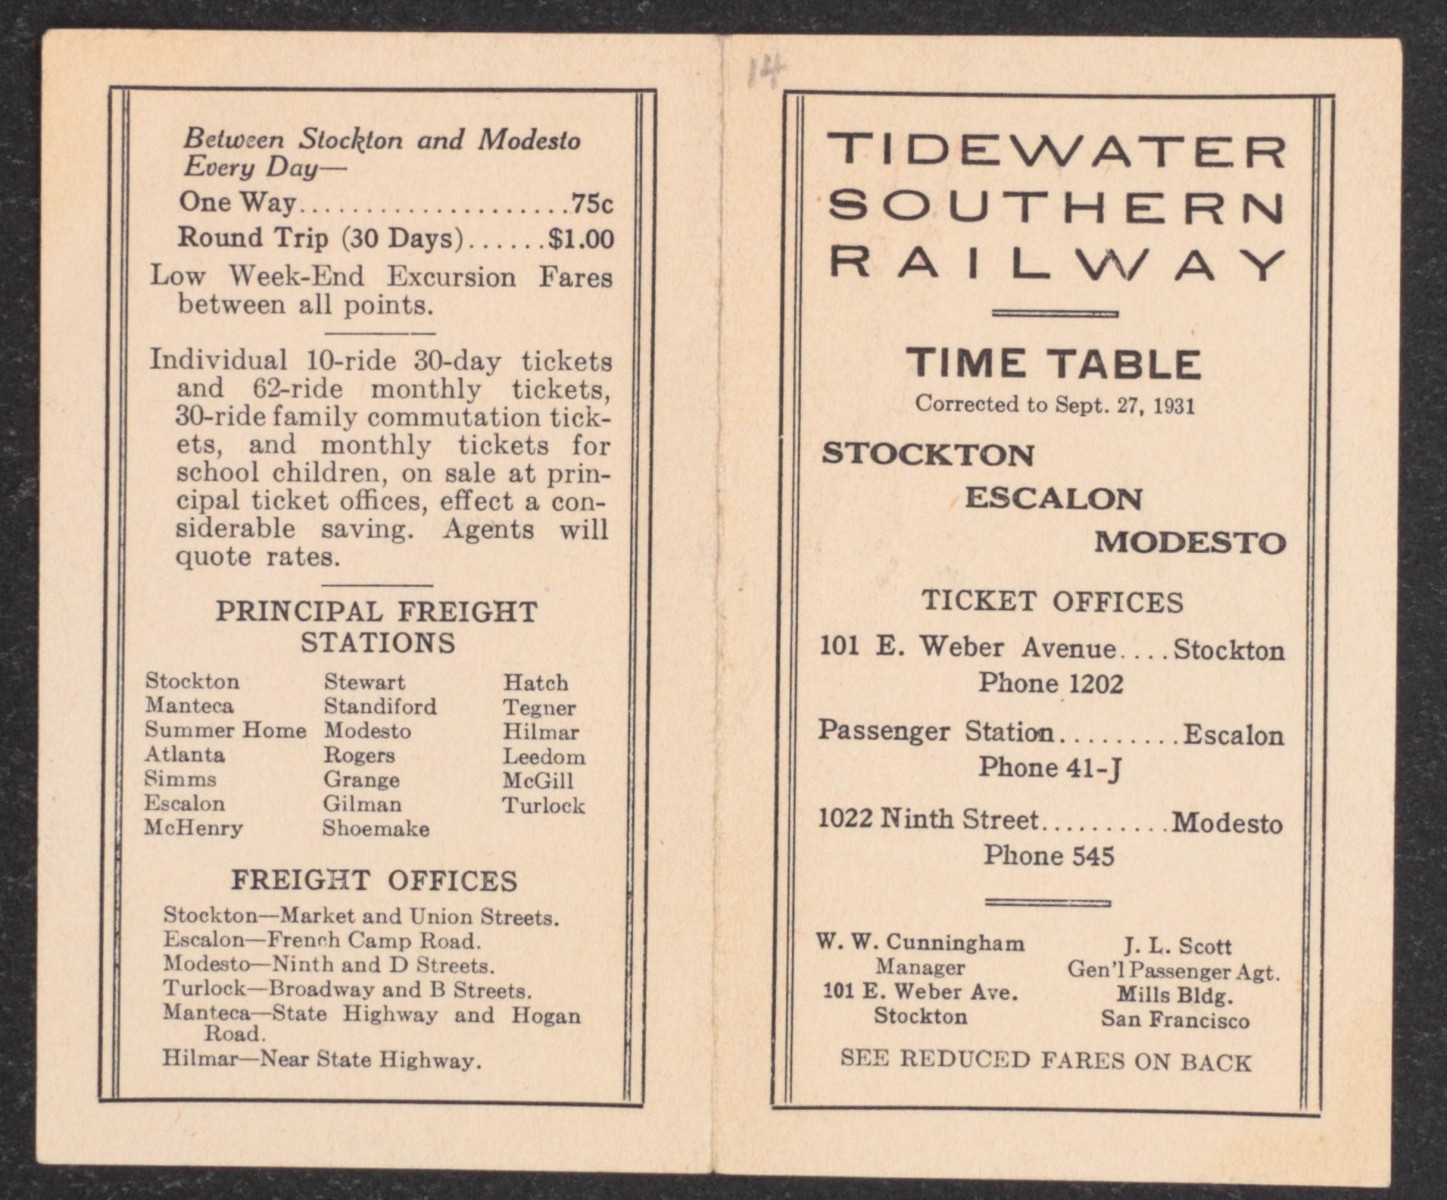 TIDEWATER SOUTHERN RAILWAY TIMETABLE FOR 1931